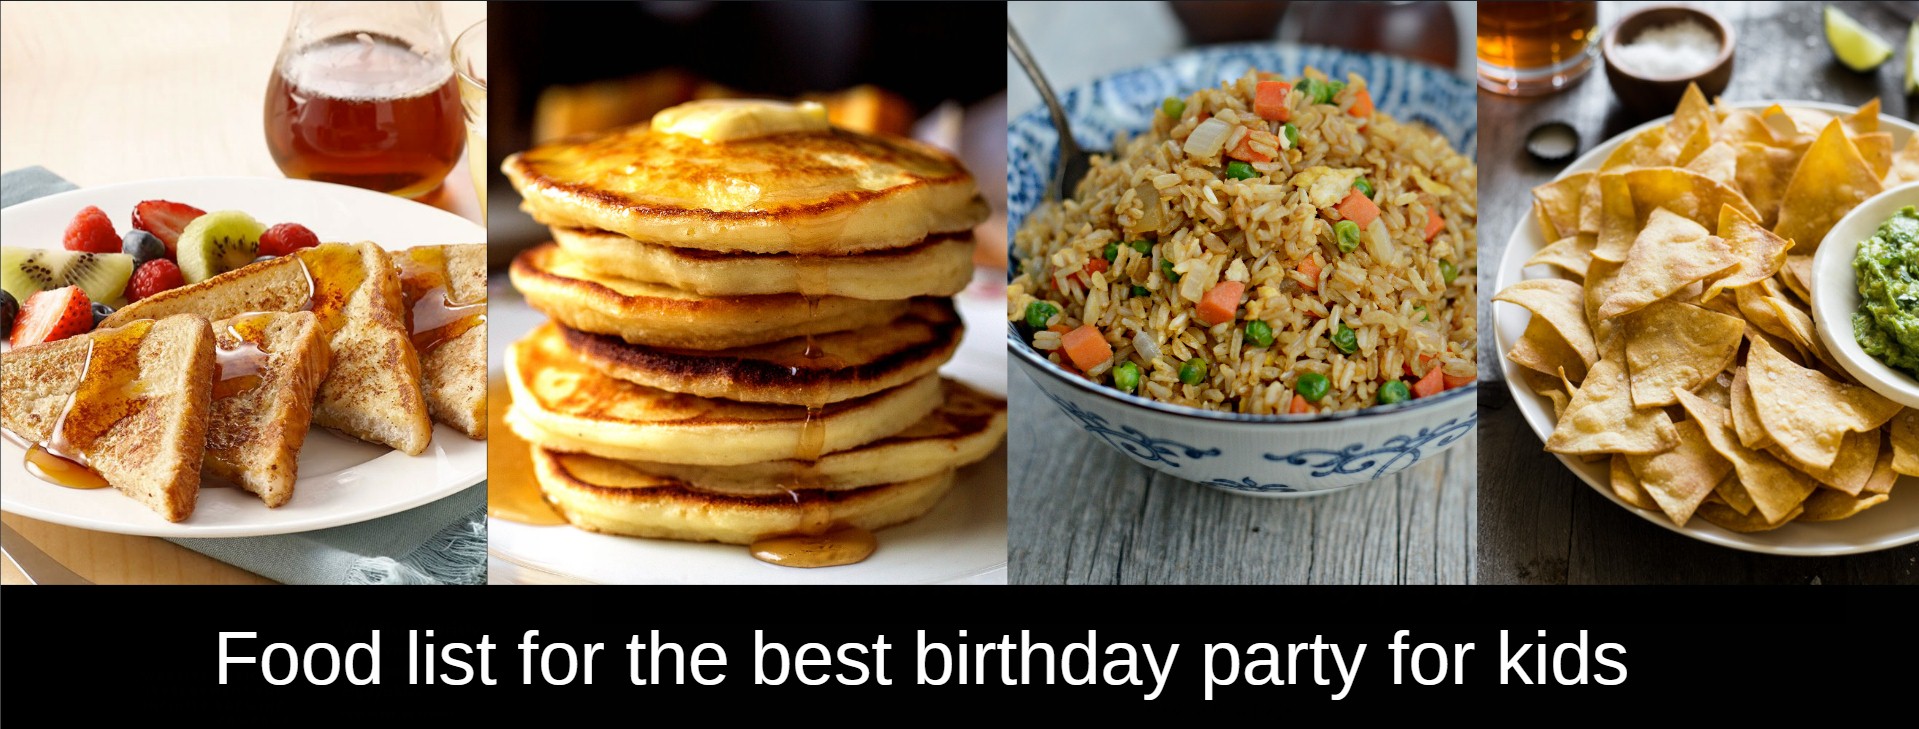 Food list for the best birthday party for kids (